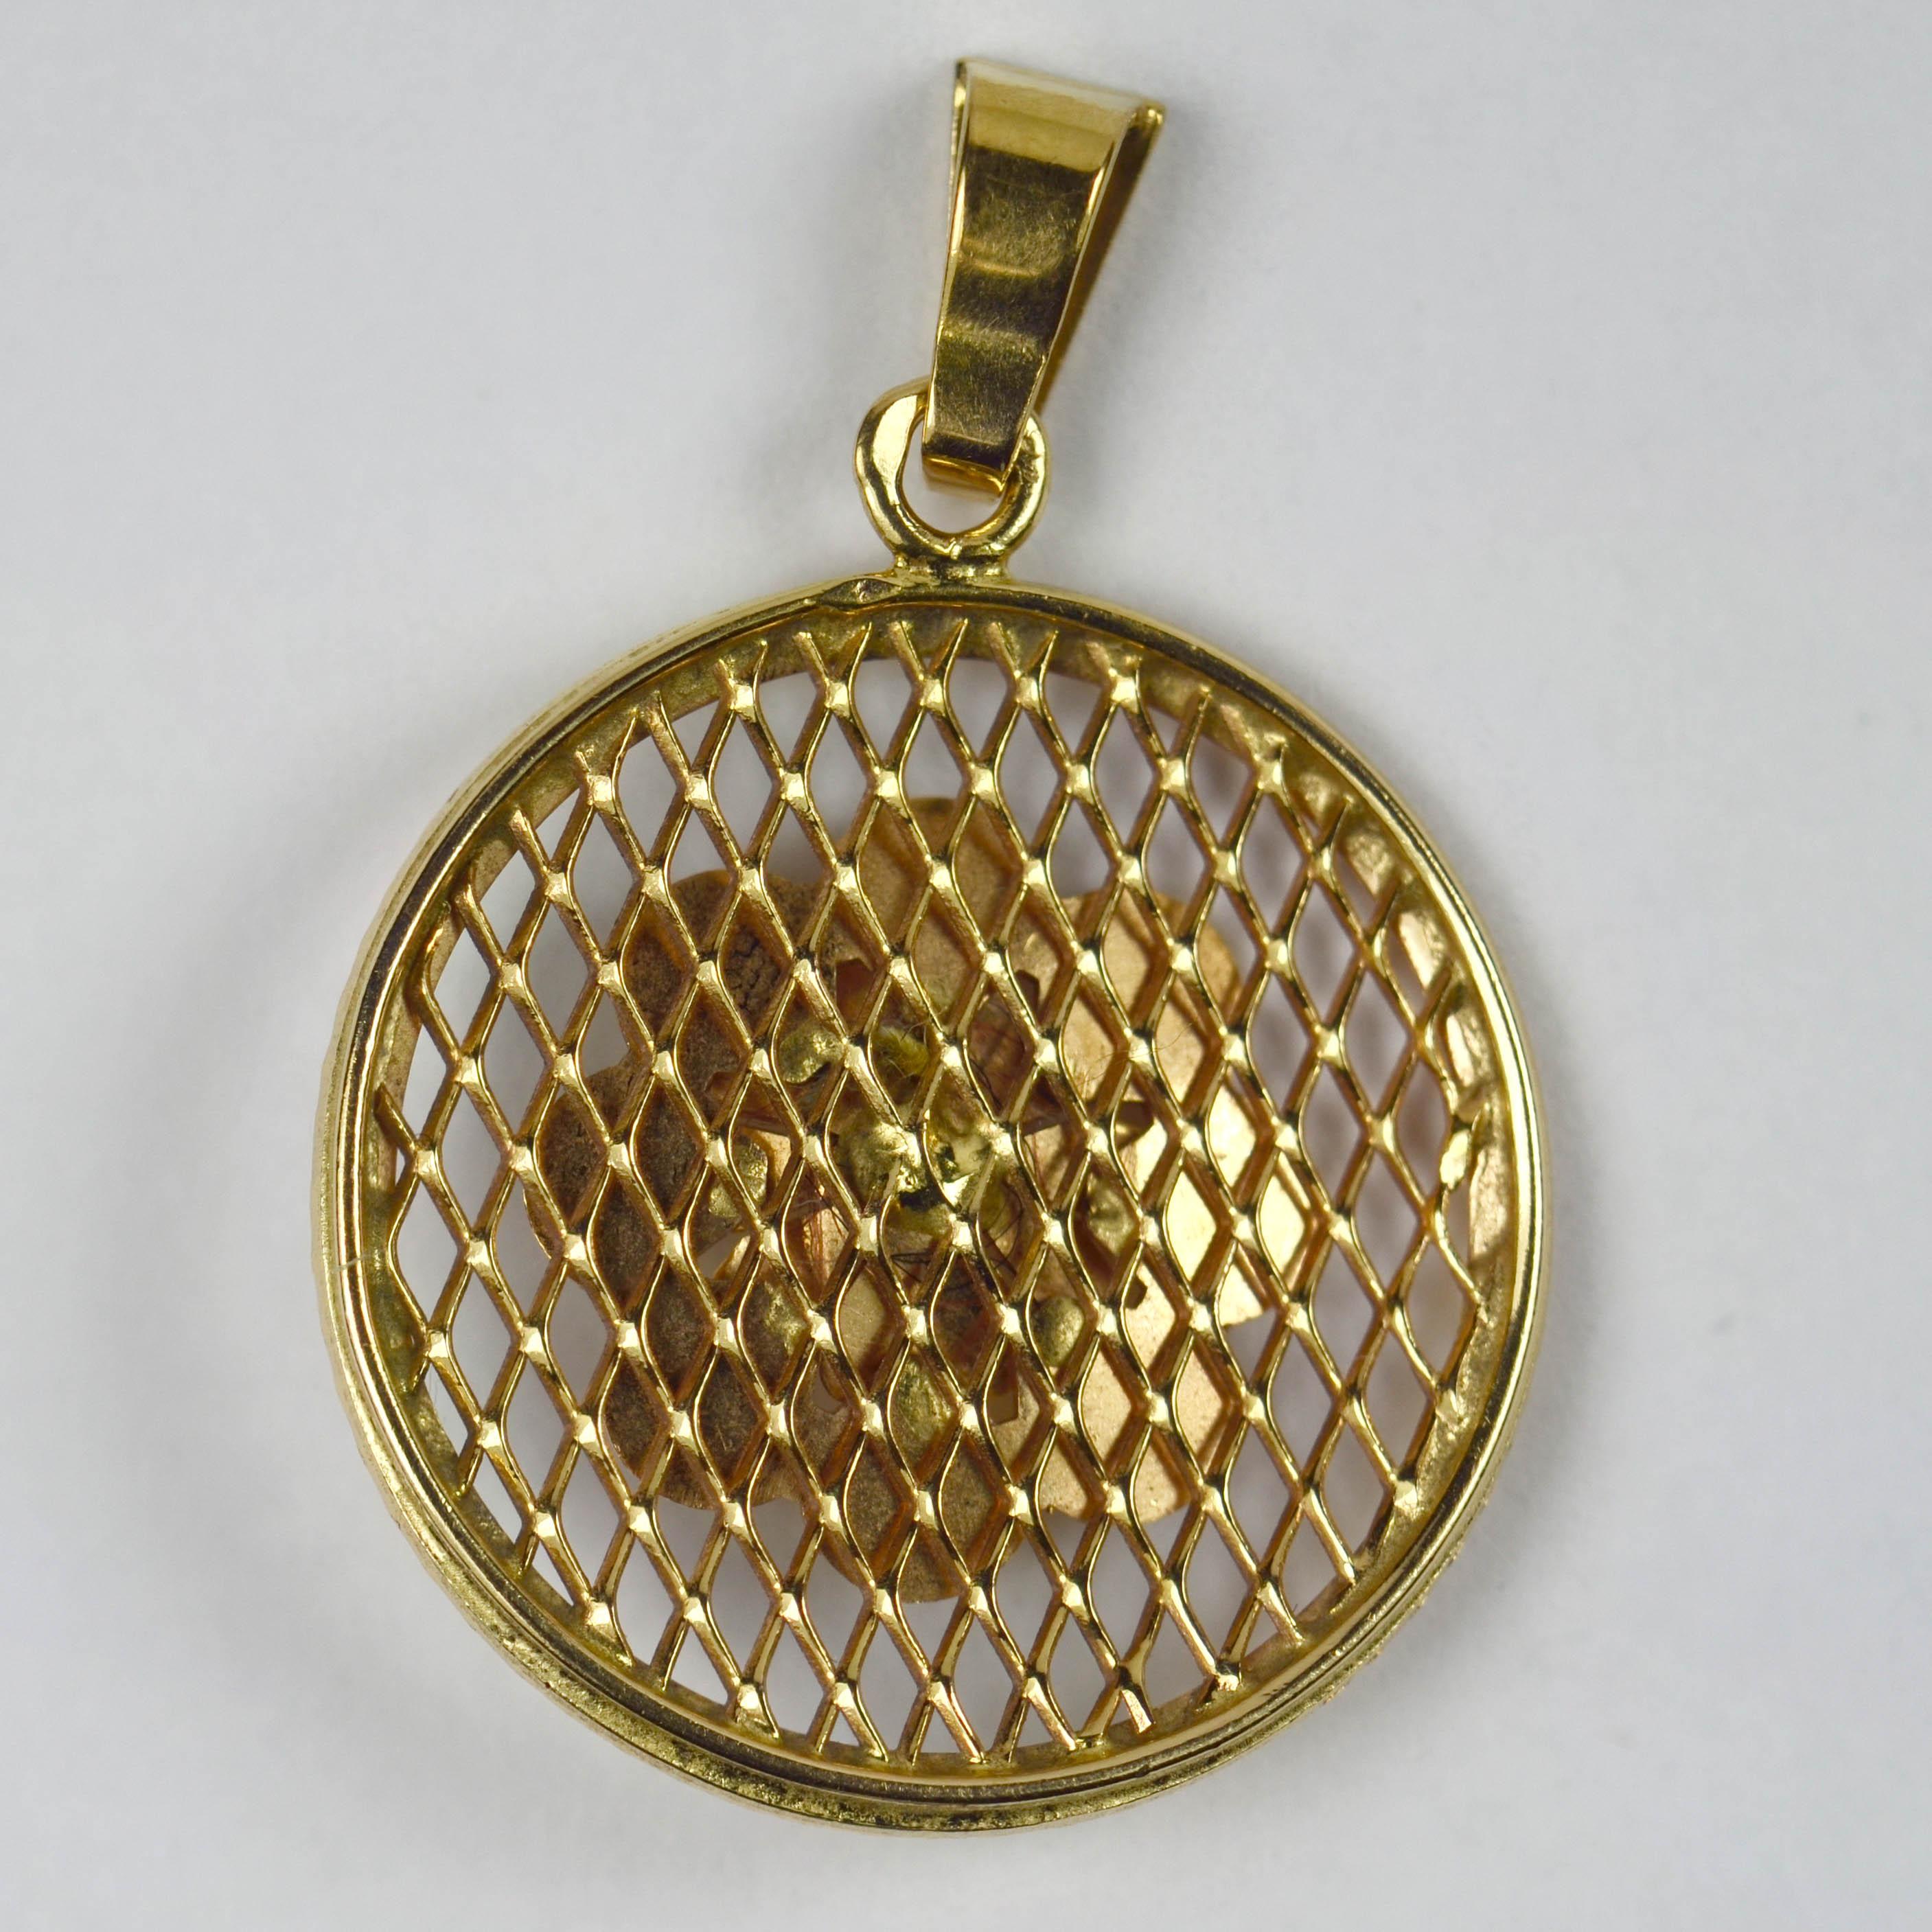 An 18 karat (18K) yellow gold charm pendant designed as a round medallion with filigree fretwork base and engine-turned flower rosette. Stamped with the eagle's head for 18 karat gold and French manufacture, with maker's mark for Charles Garnier of